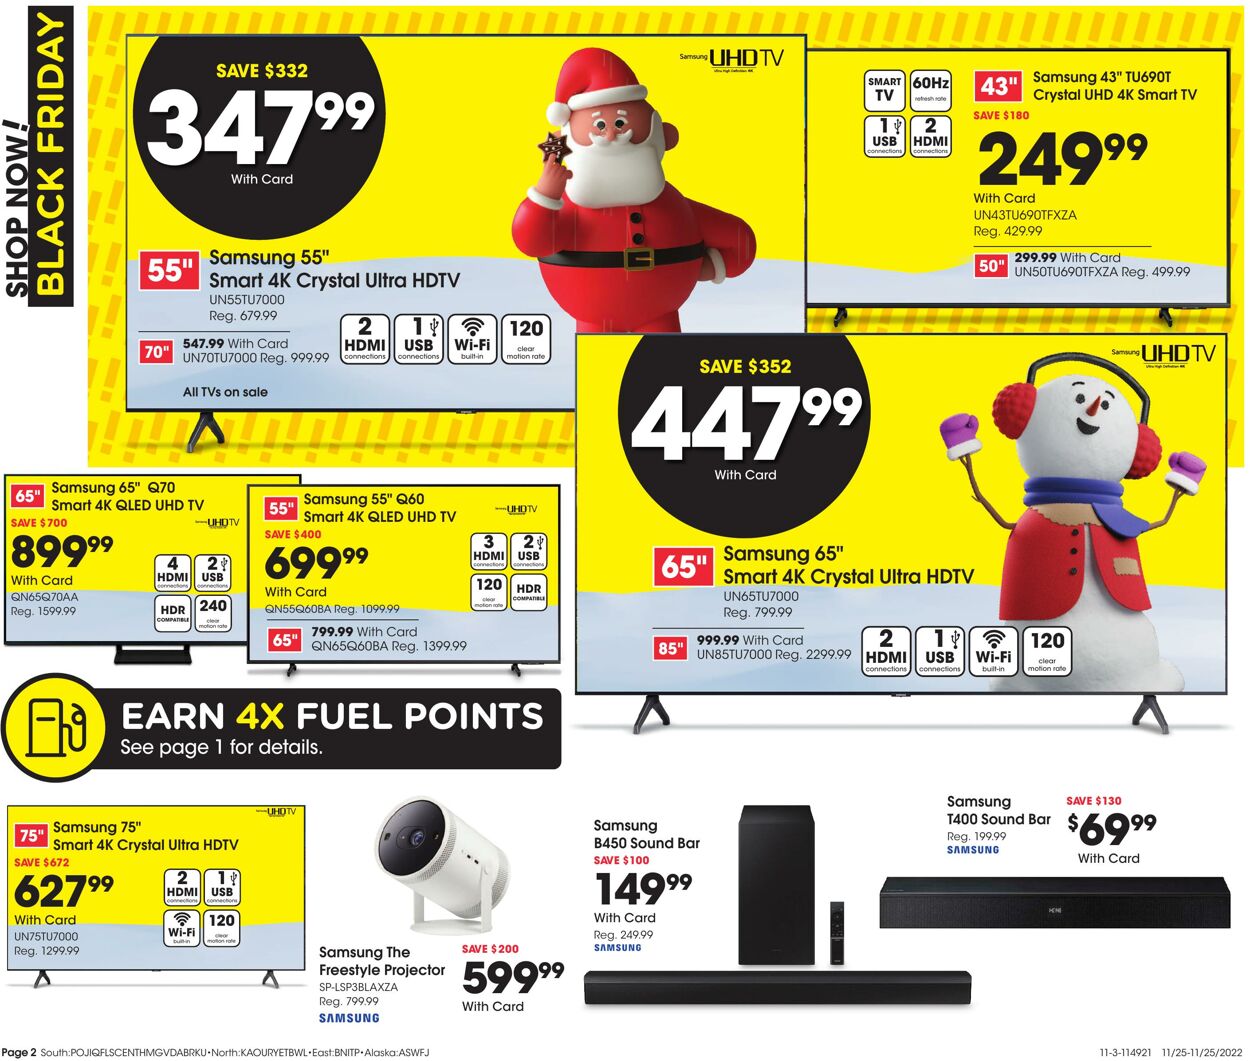 Weekly ad Fred Meyer 11/25/2022 - 11/25/2022